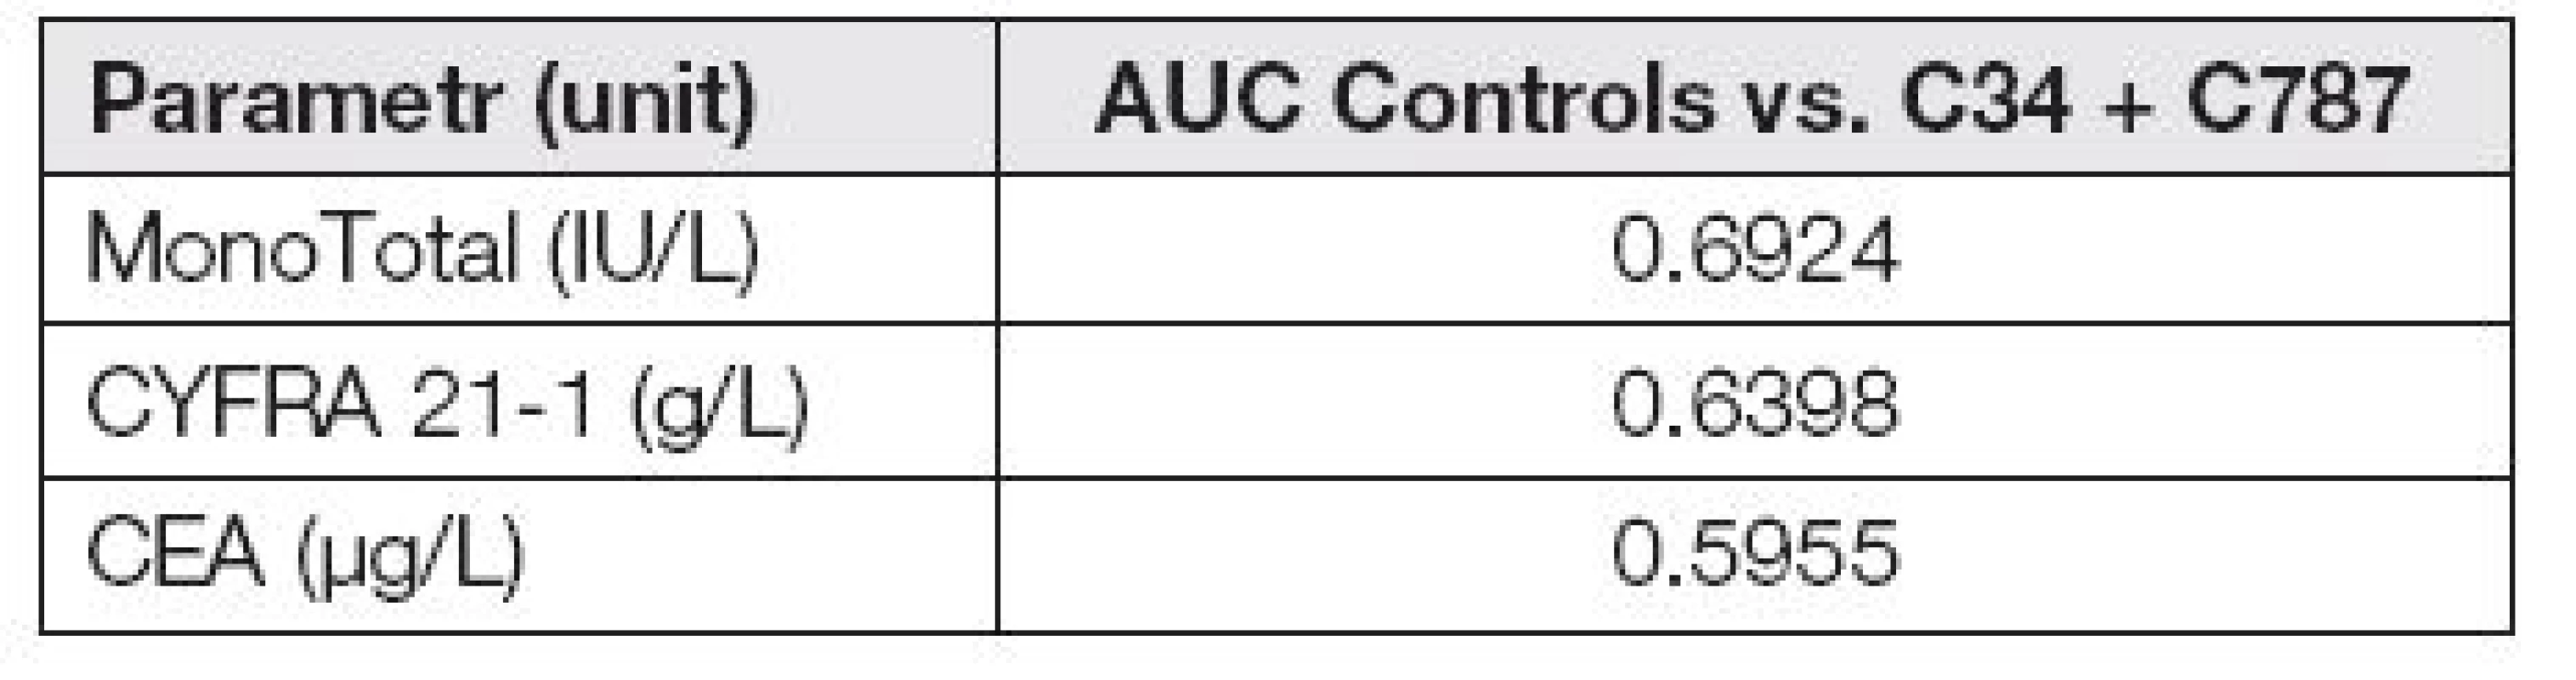 AUC of tumor markers in control group vs. C34 and C787